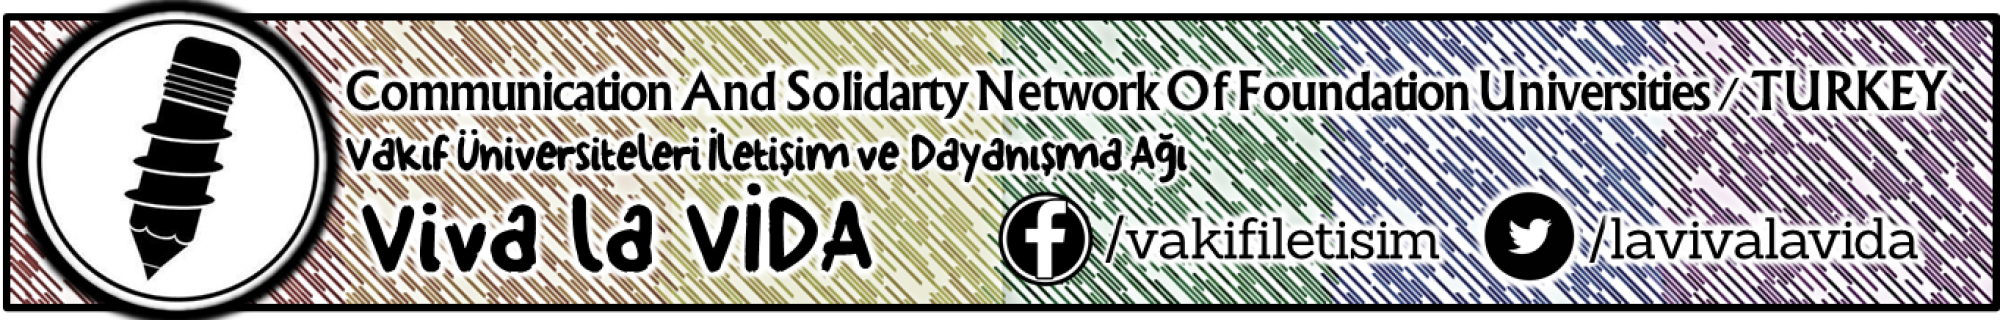 communication and solidarty network of foundation universities